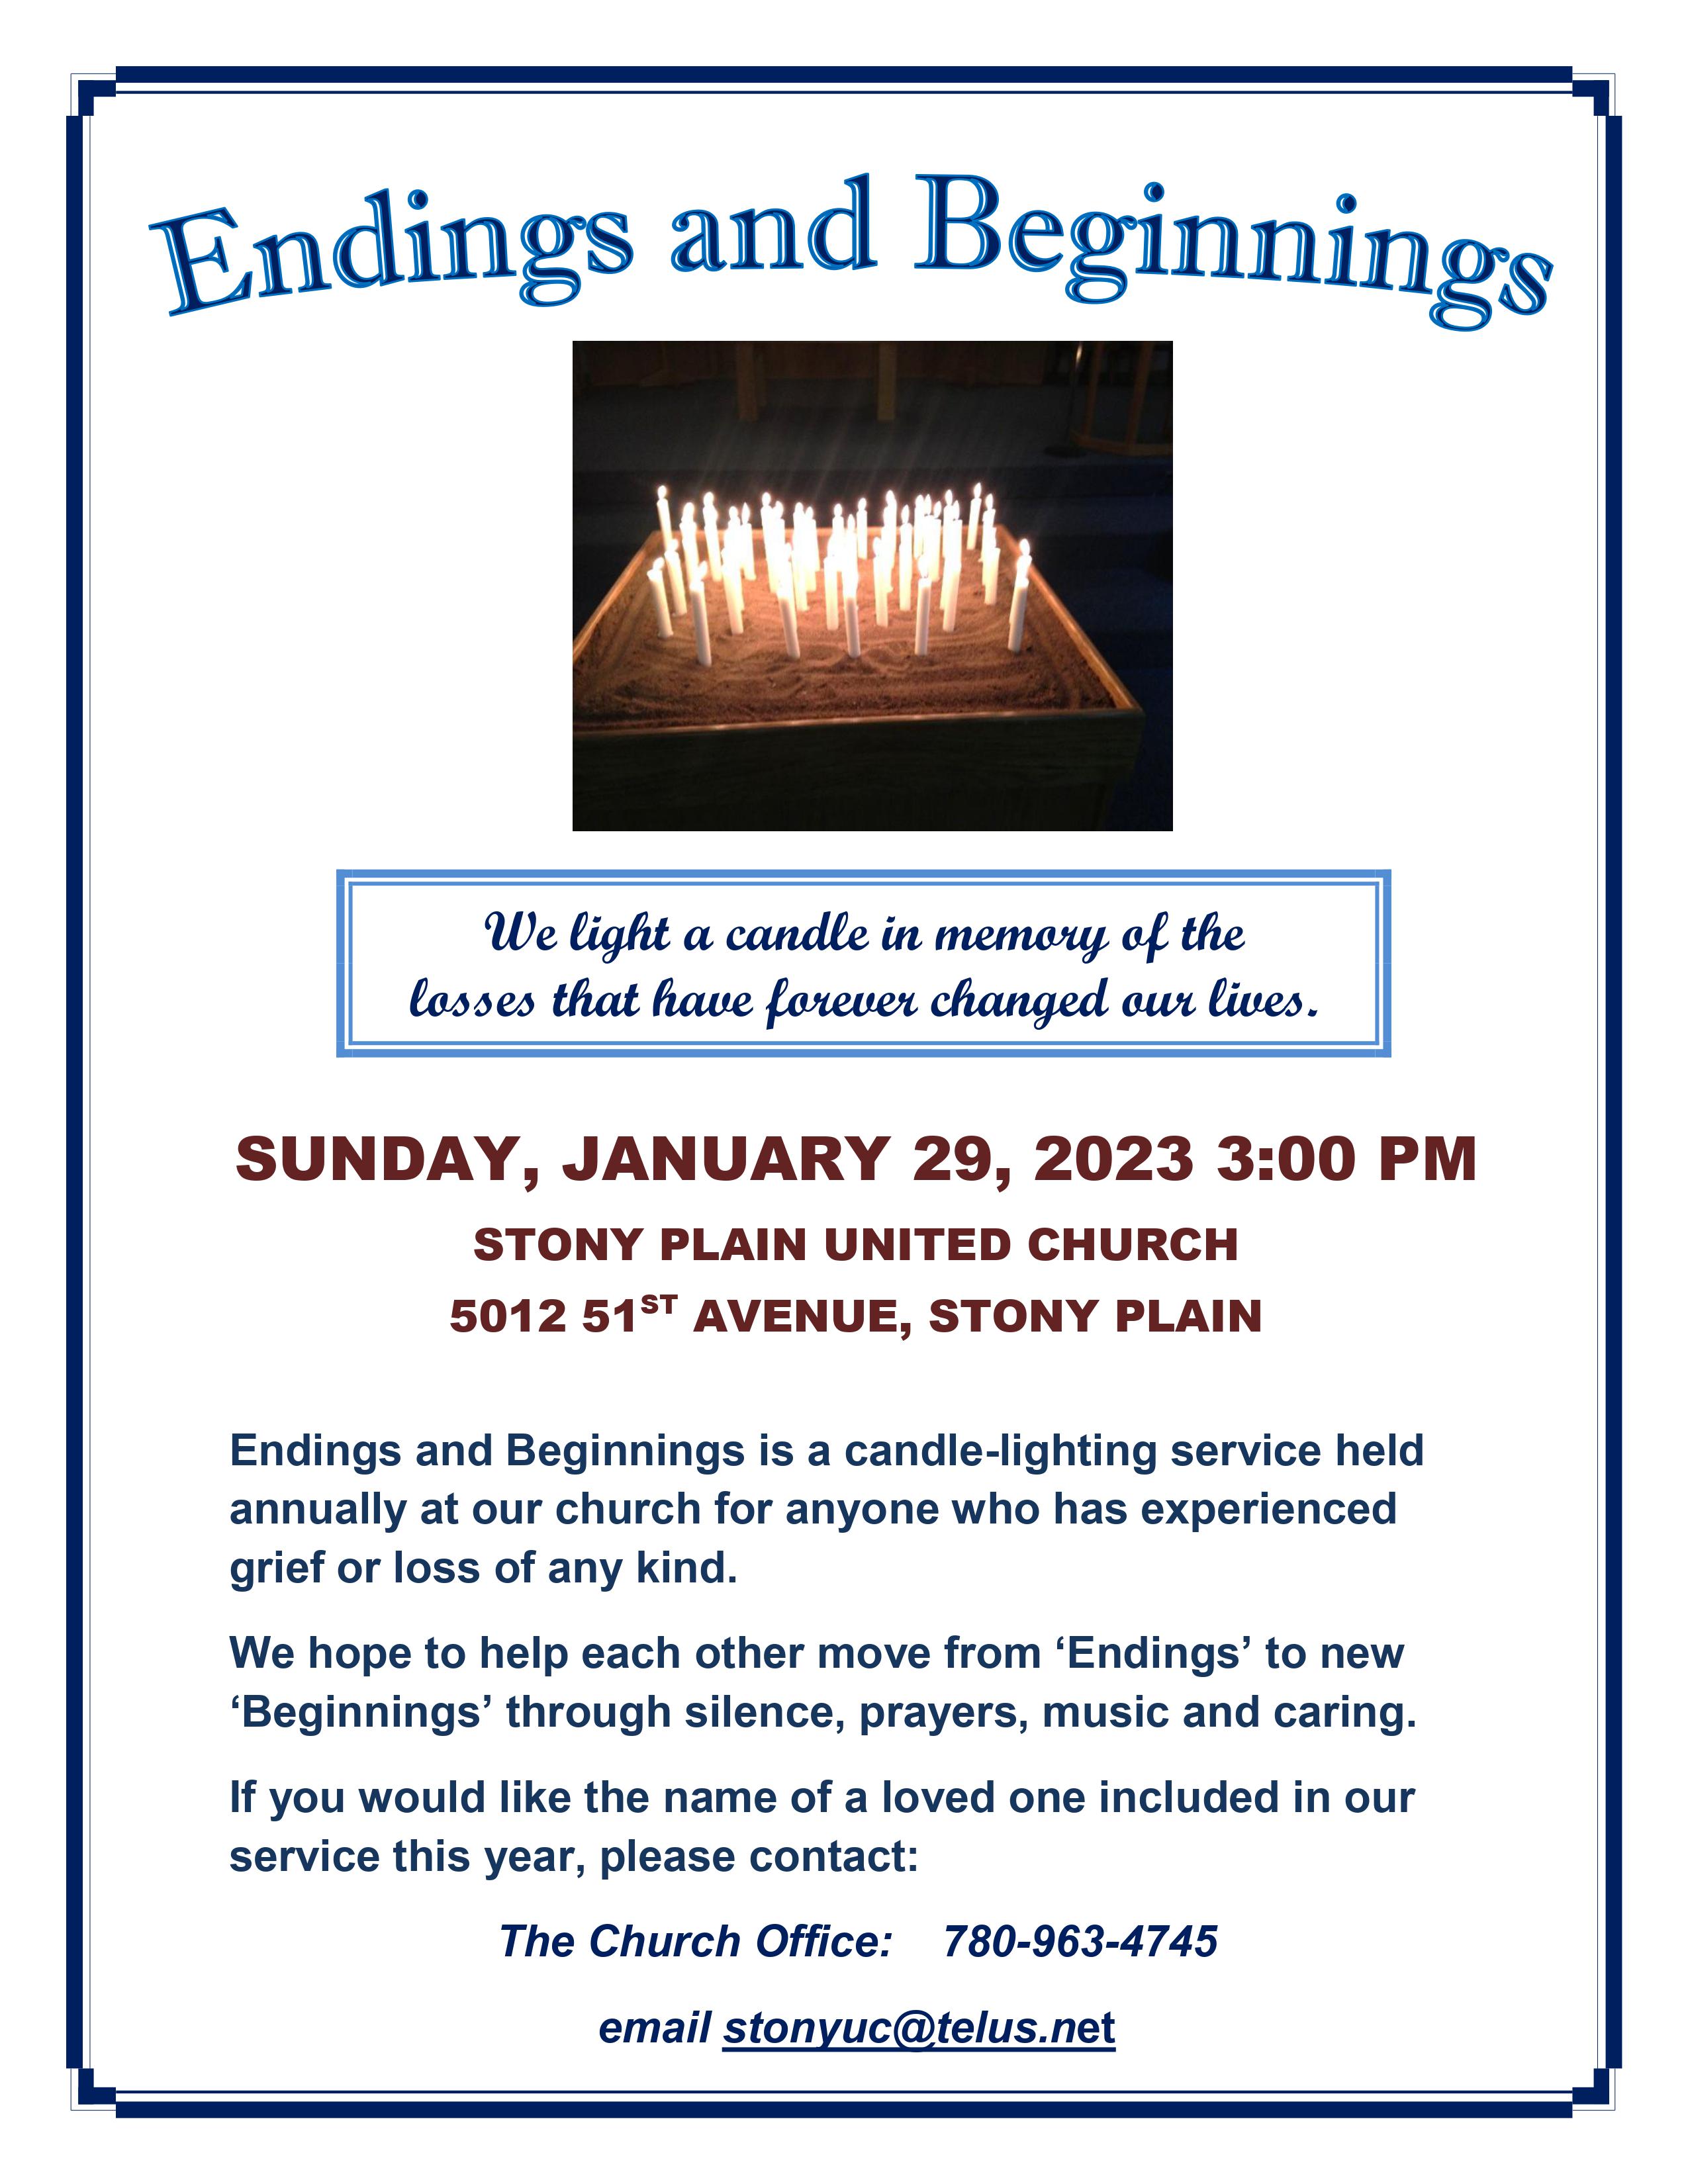 poster for the annual "Endings and Beginnings" service